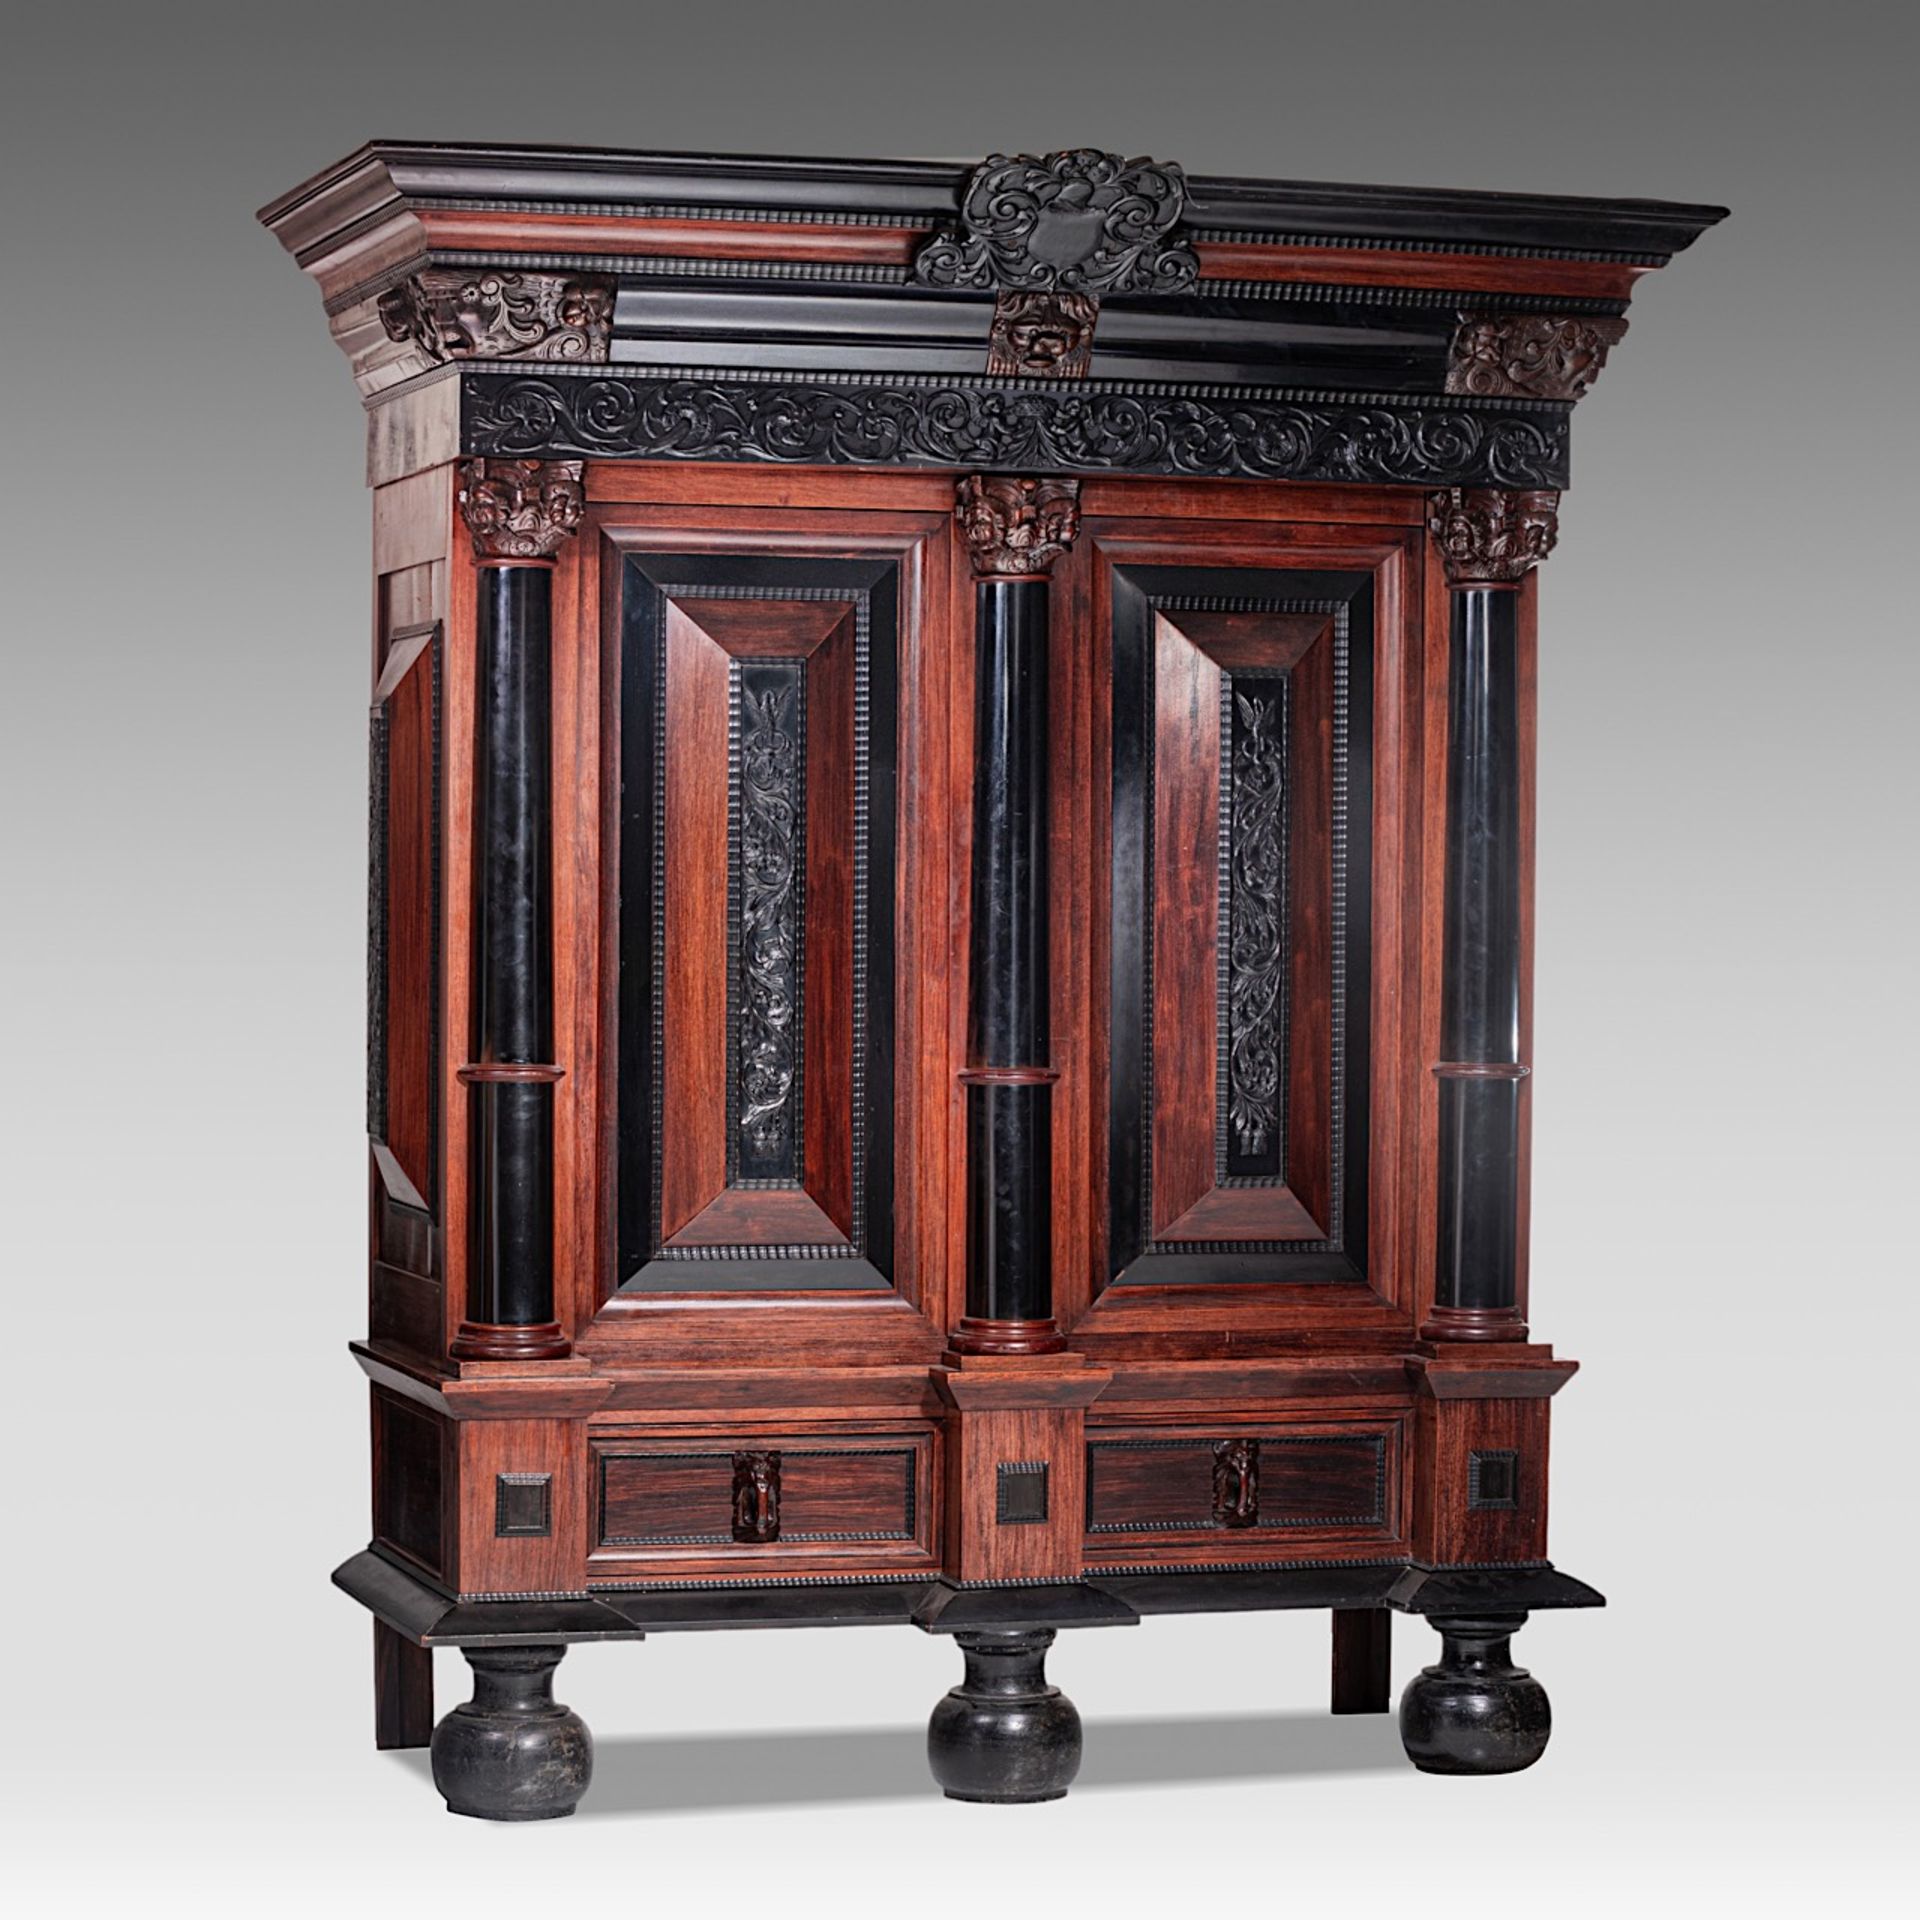 A large Baroque style rosewood and ebony cupboard, H 235 - W 200 - D 85 cm - Image 2 of 6